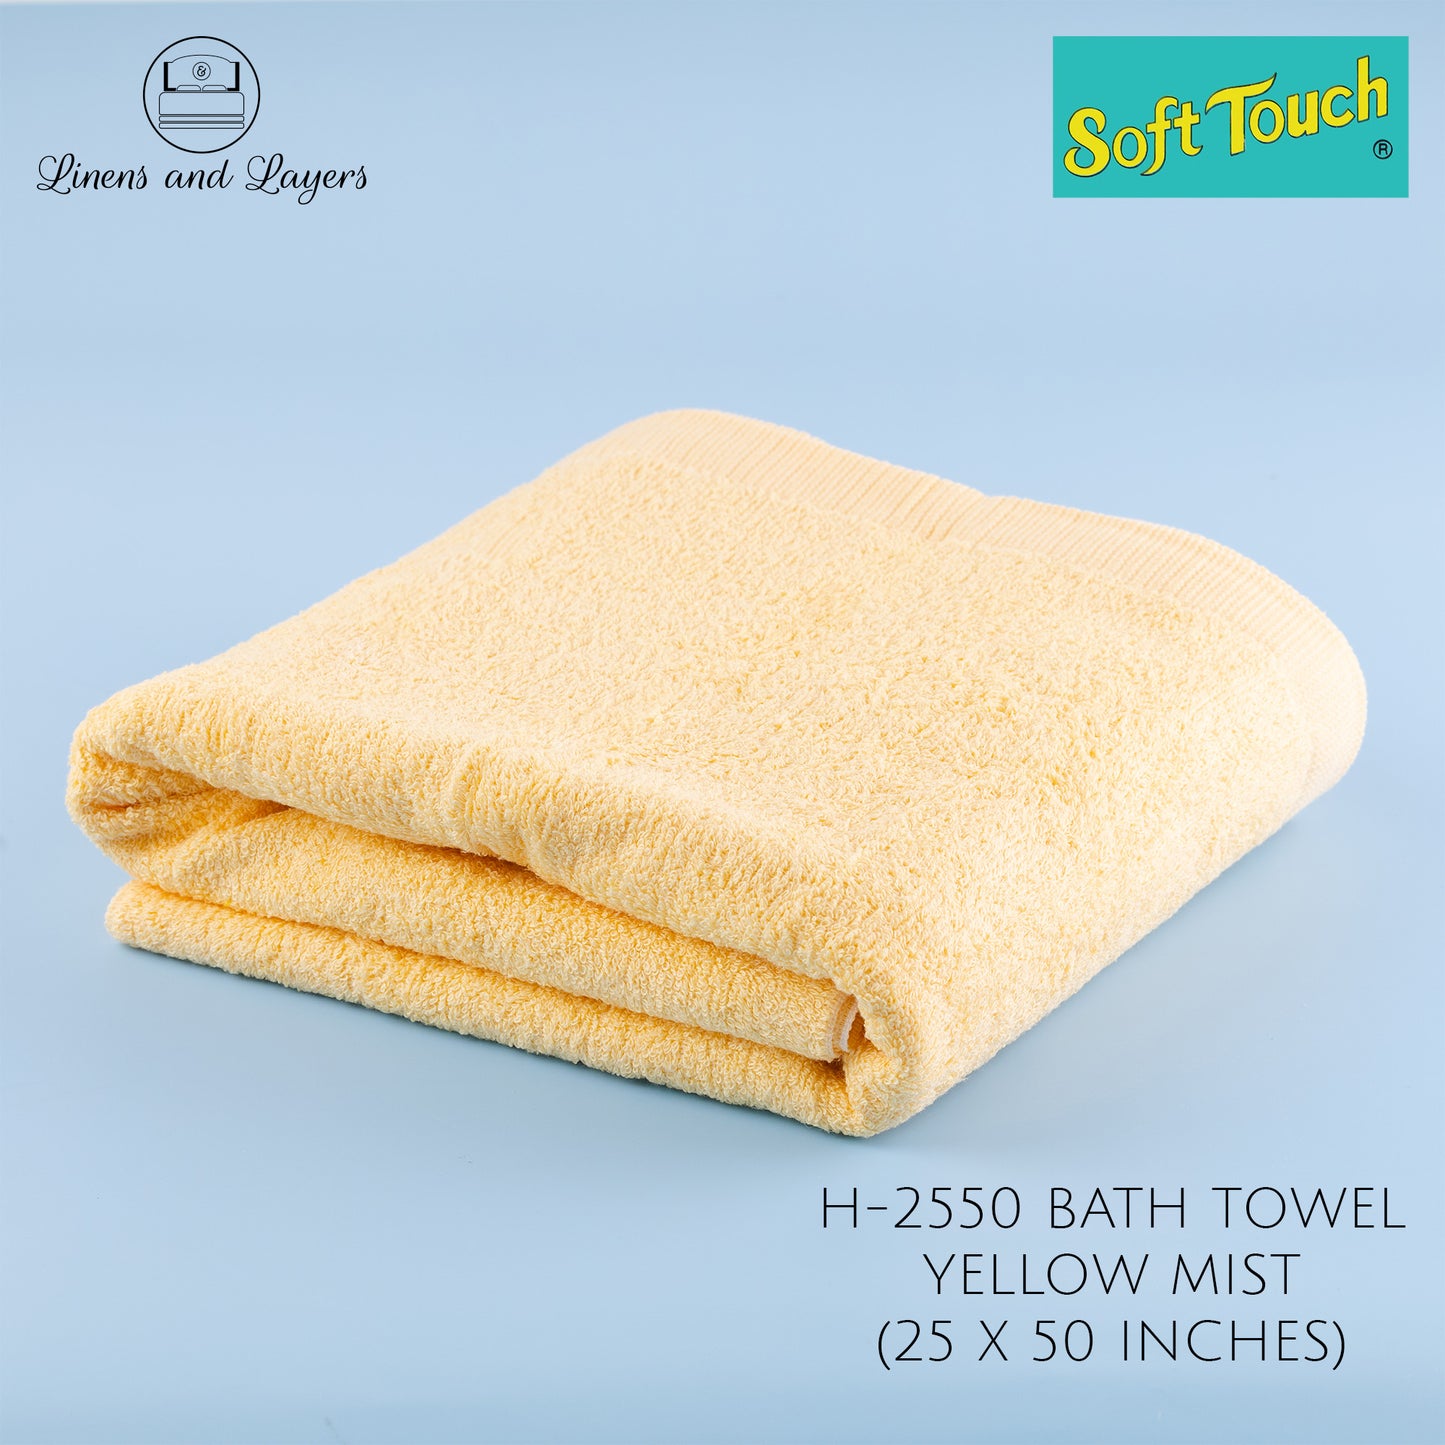 Soft Touch Bath Towel (409 GSM) - H-2550 Terrycloth - 25x50 inches